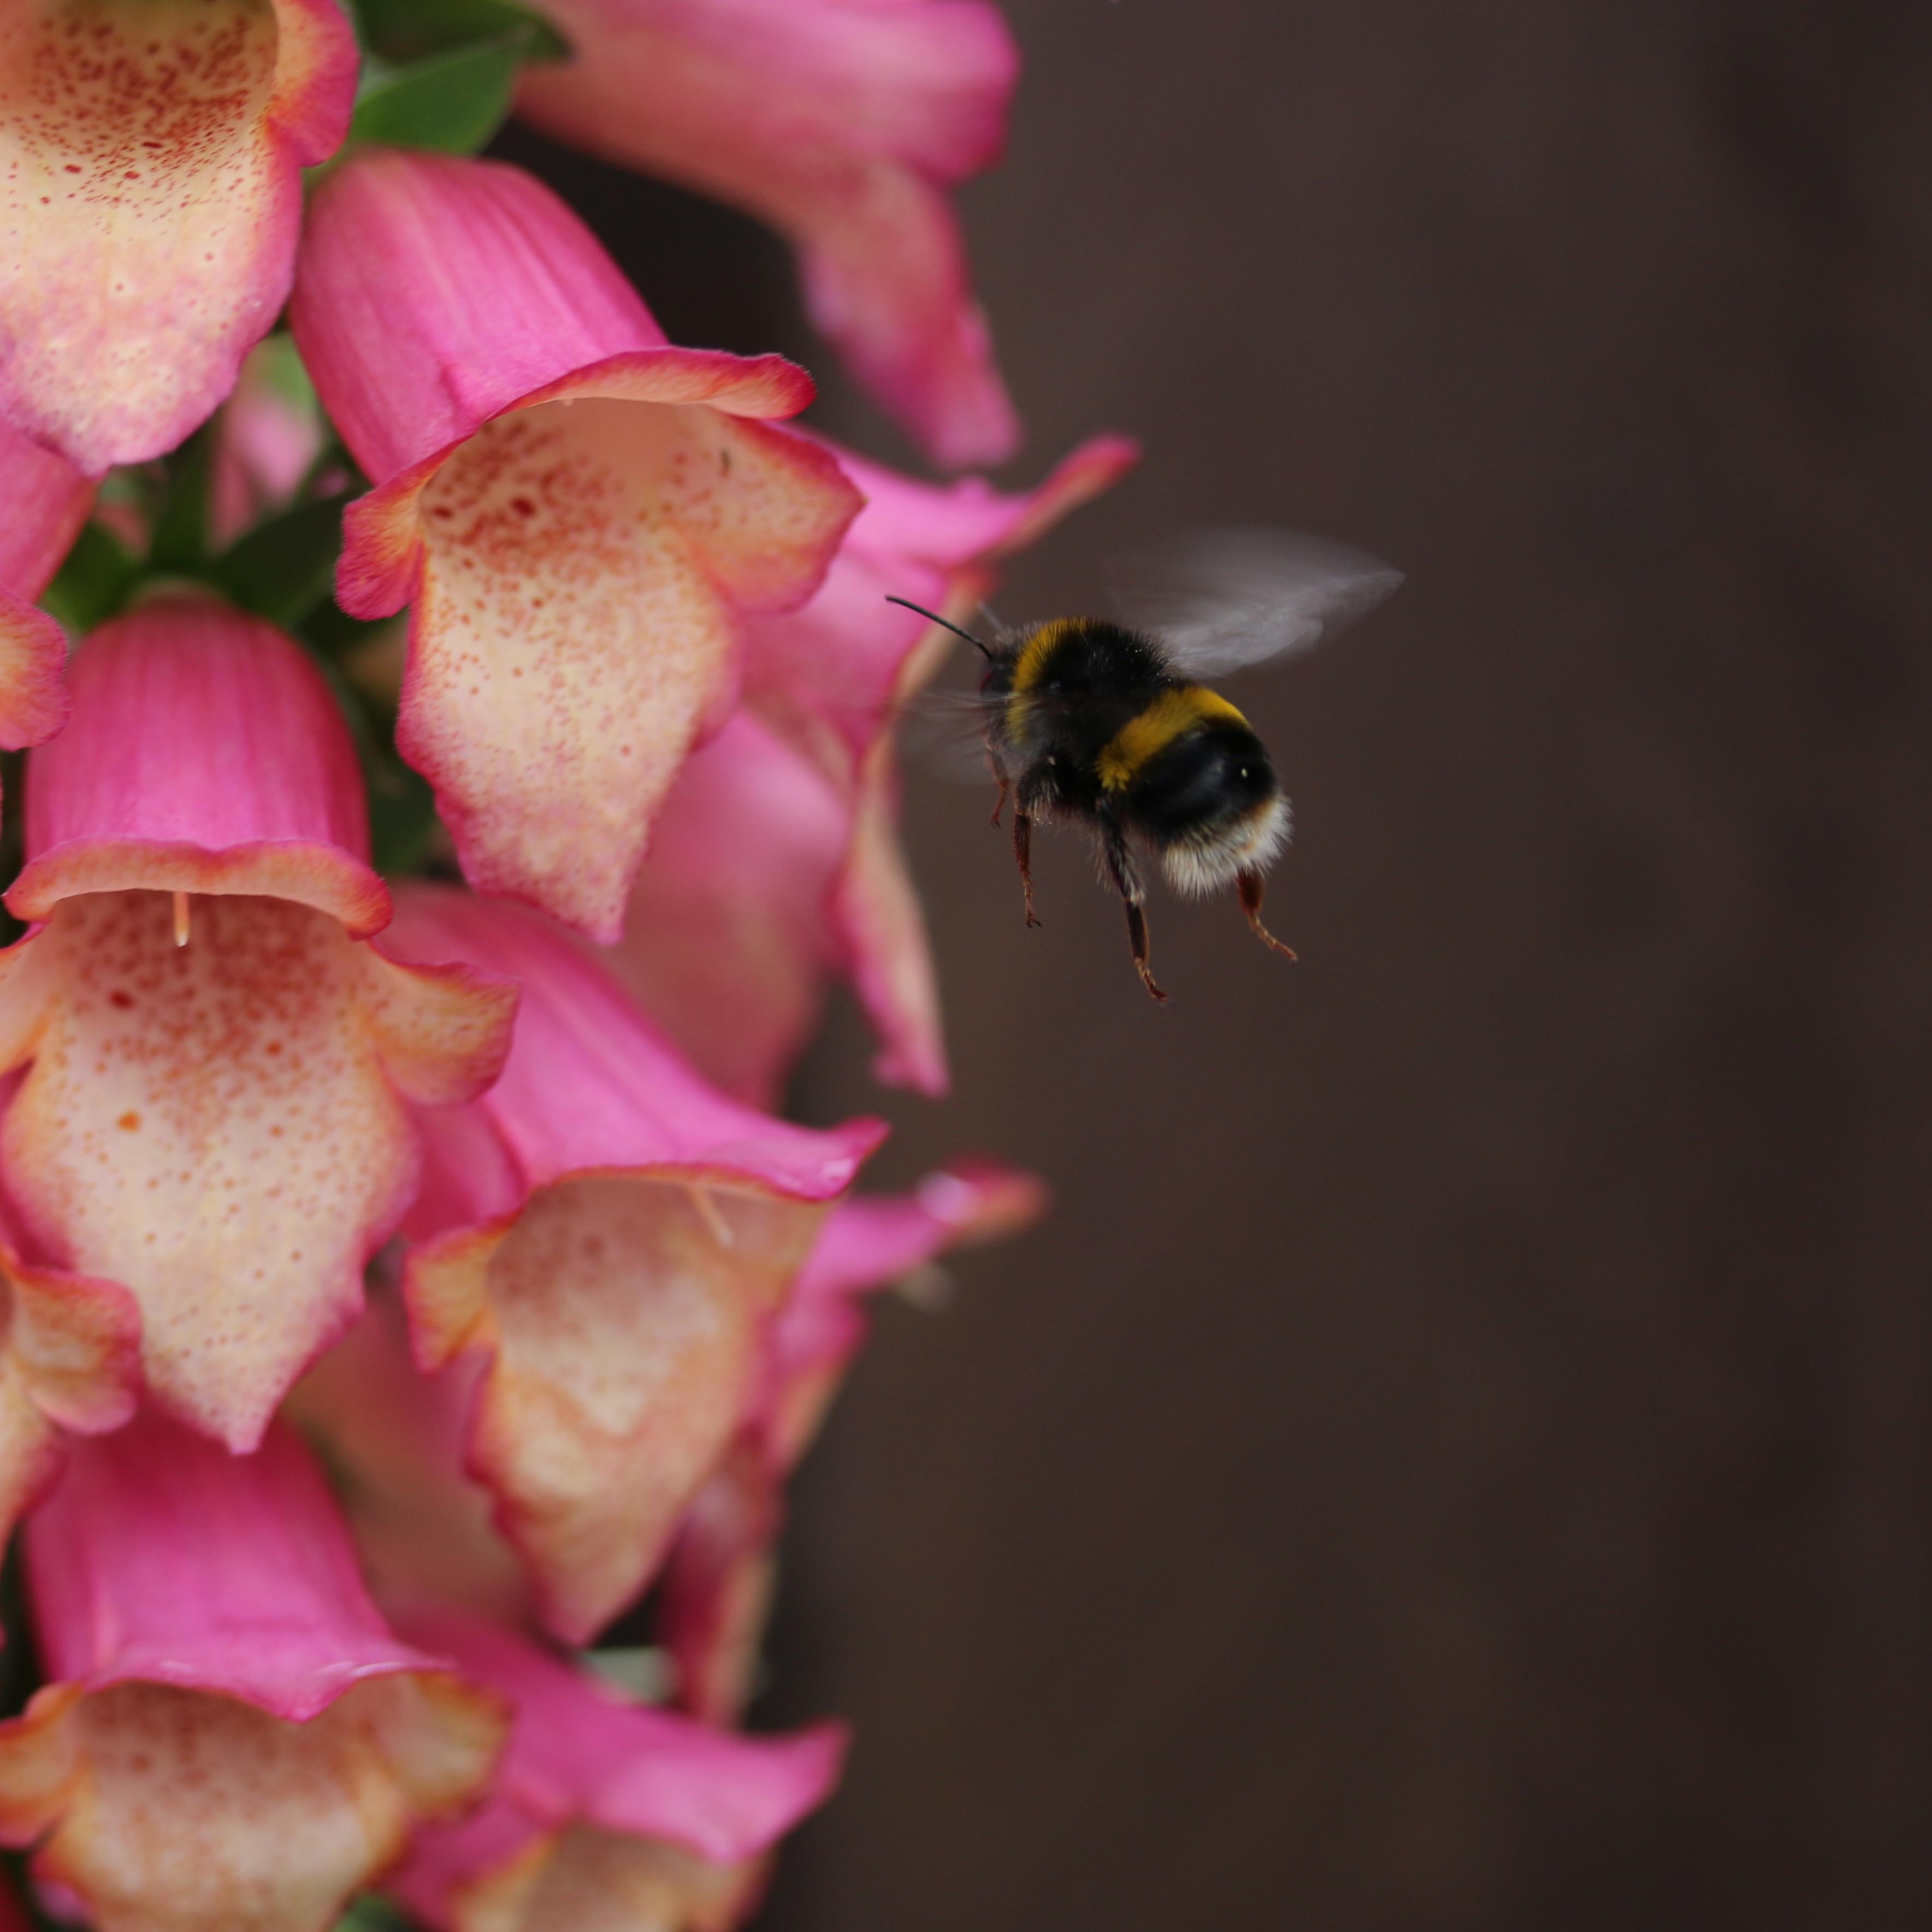 bumblebee near pink and white petaled flower closeup photography